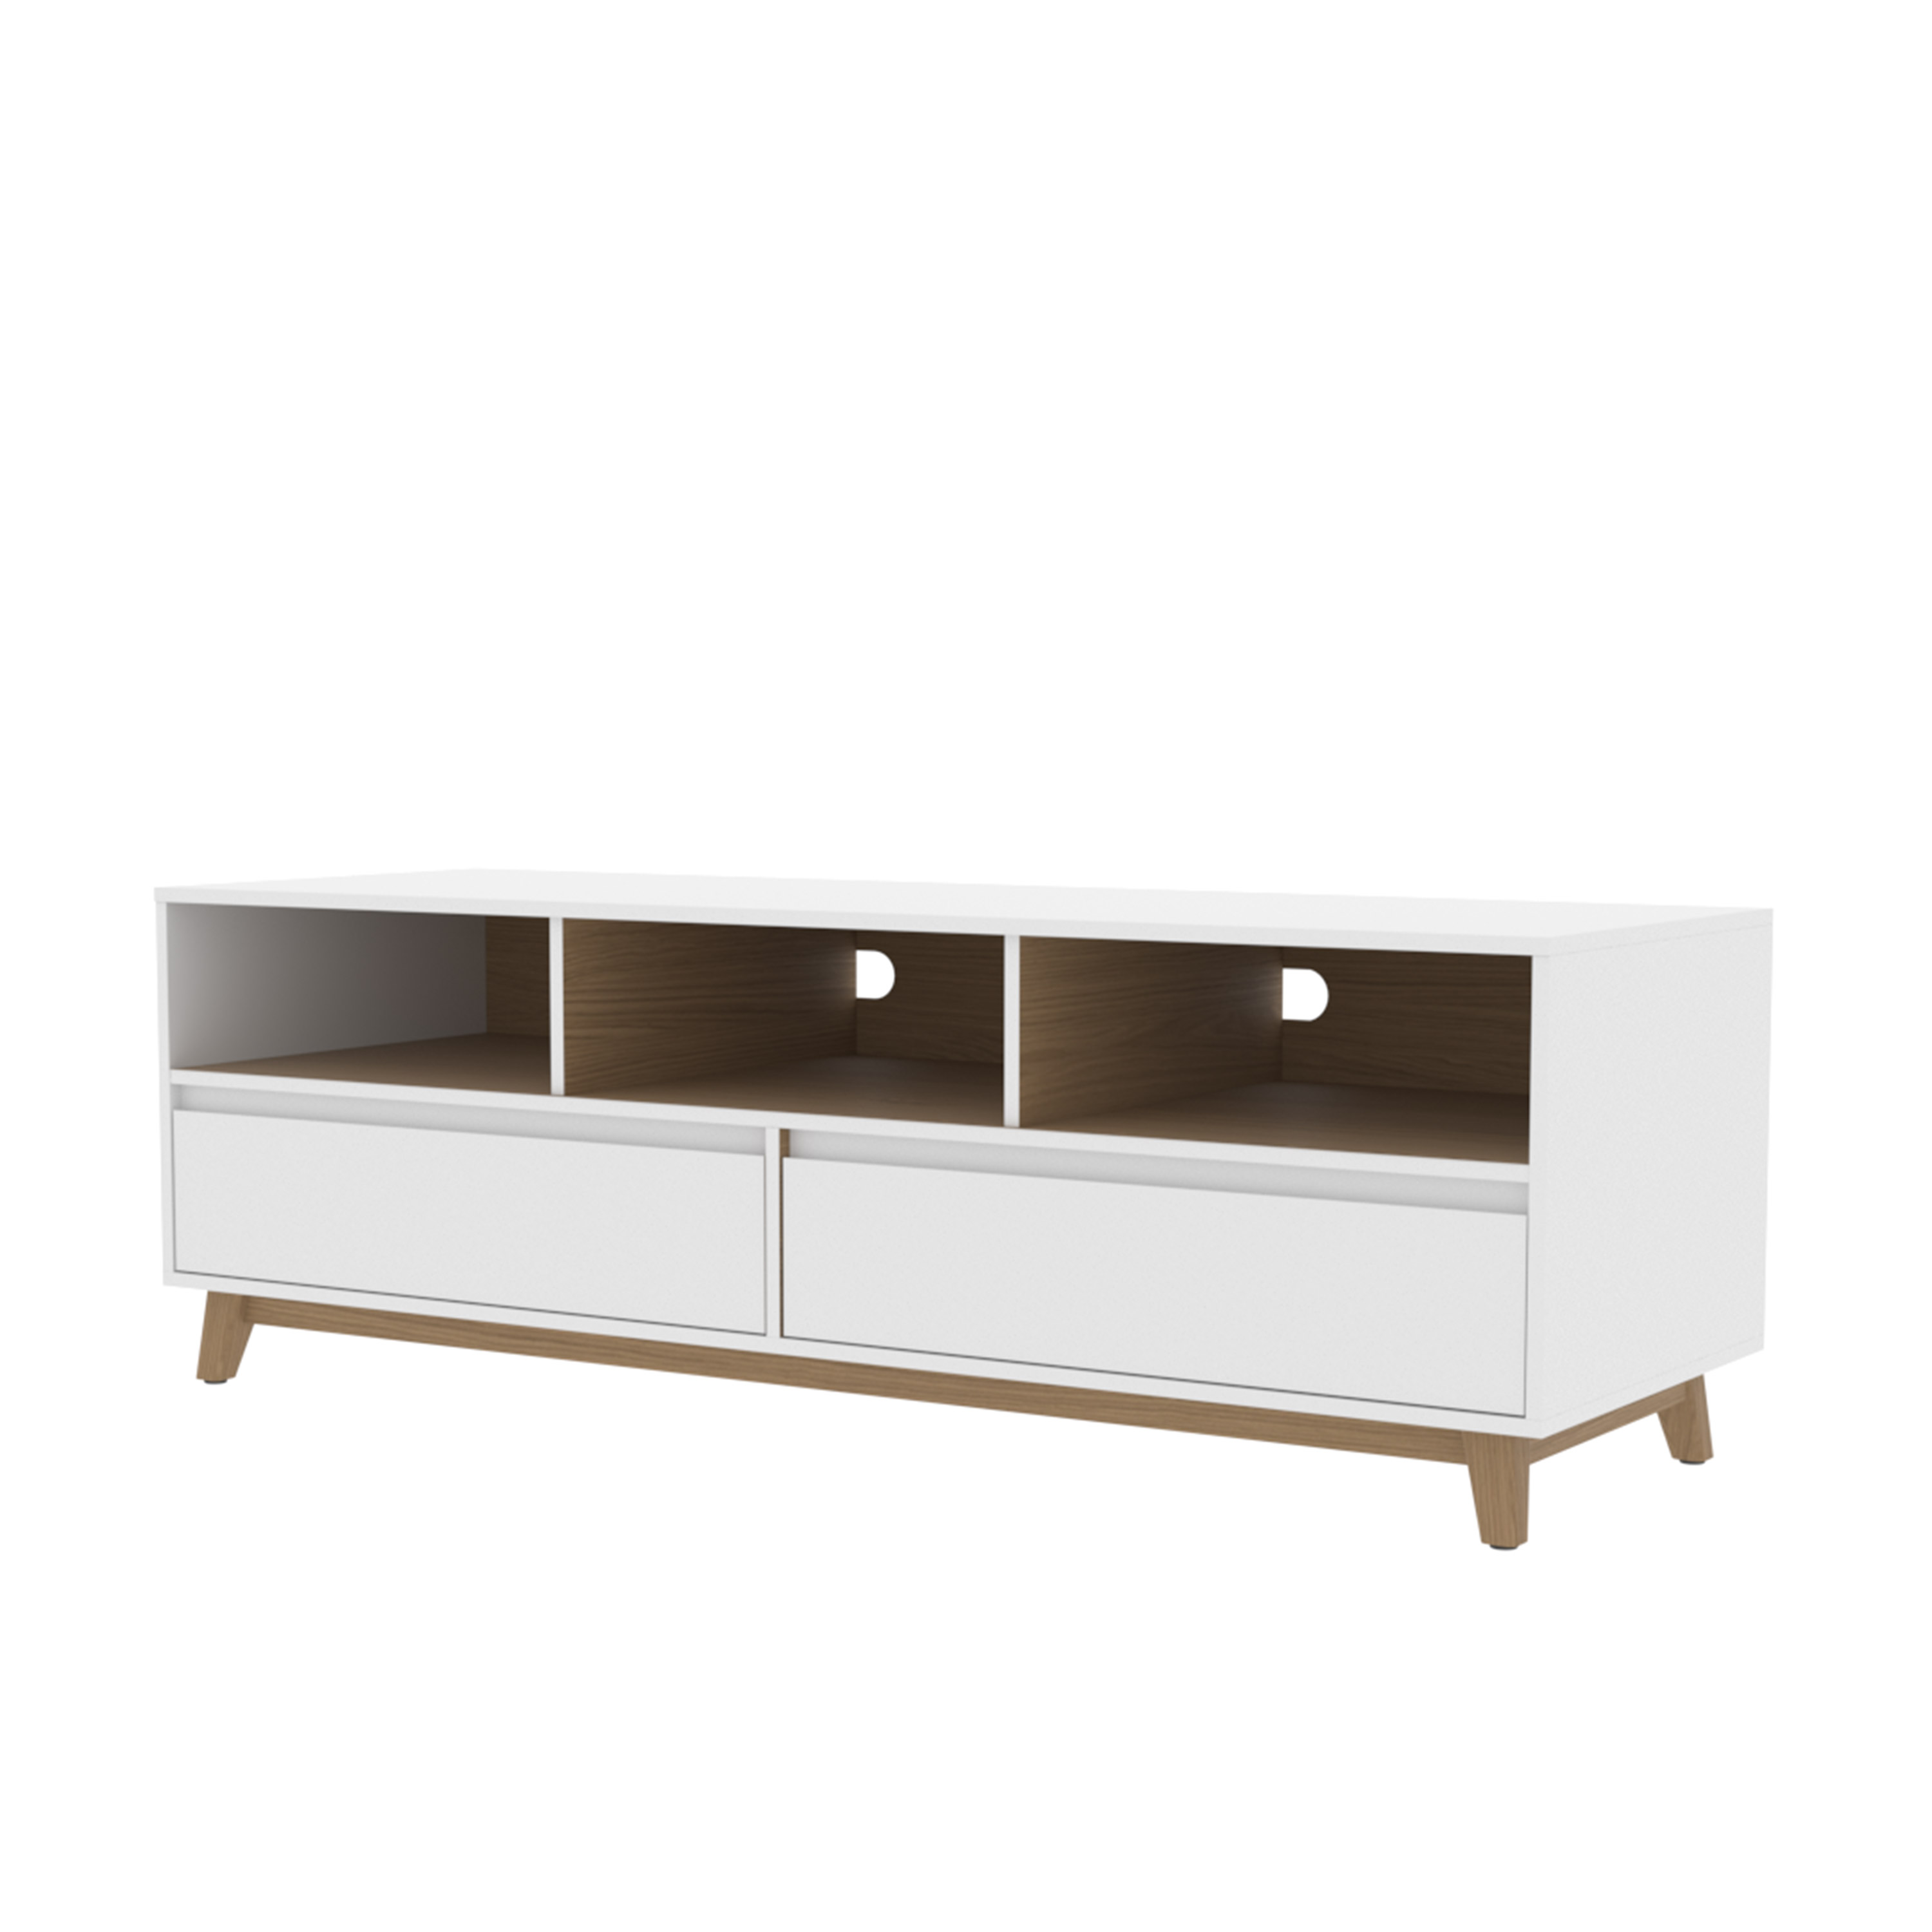 Mainstays Mid-Century TV Stand for TVs up to 70", White Finish - image 8 of 8